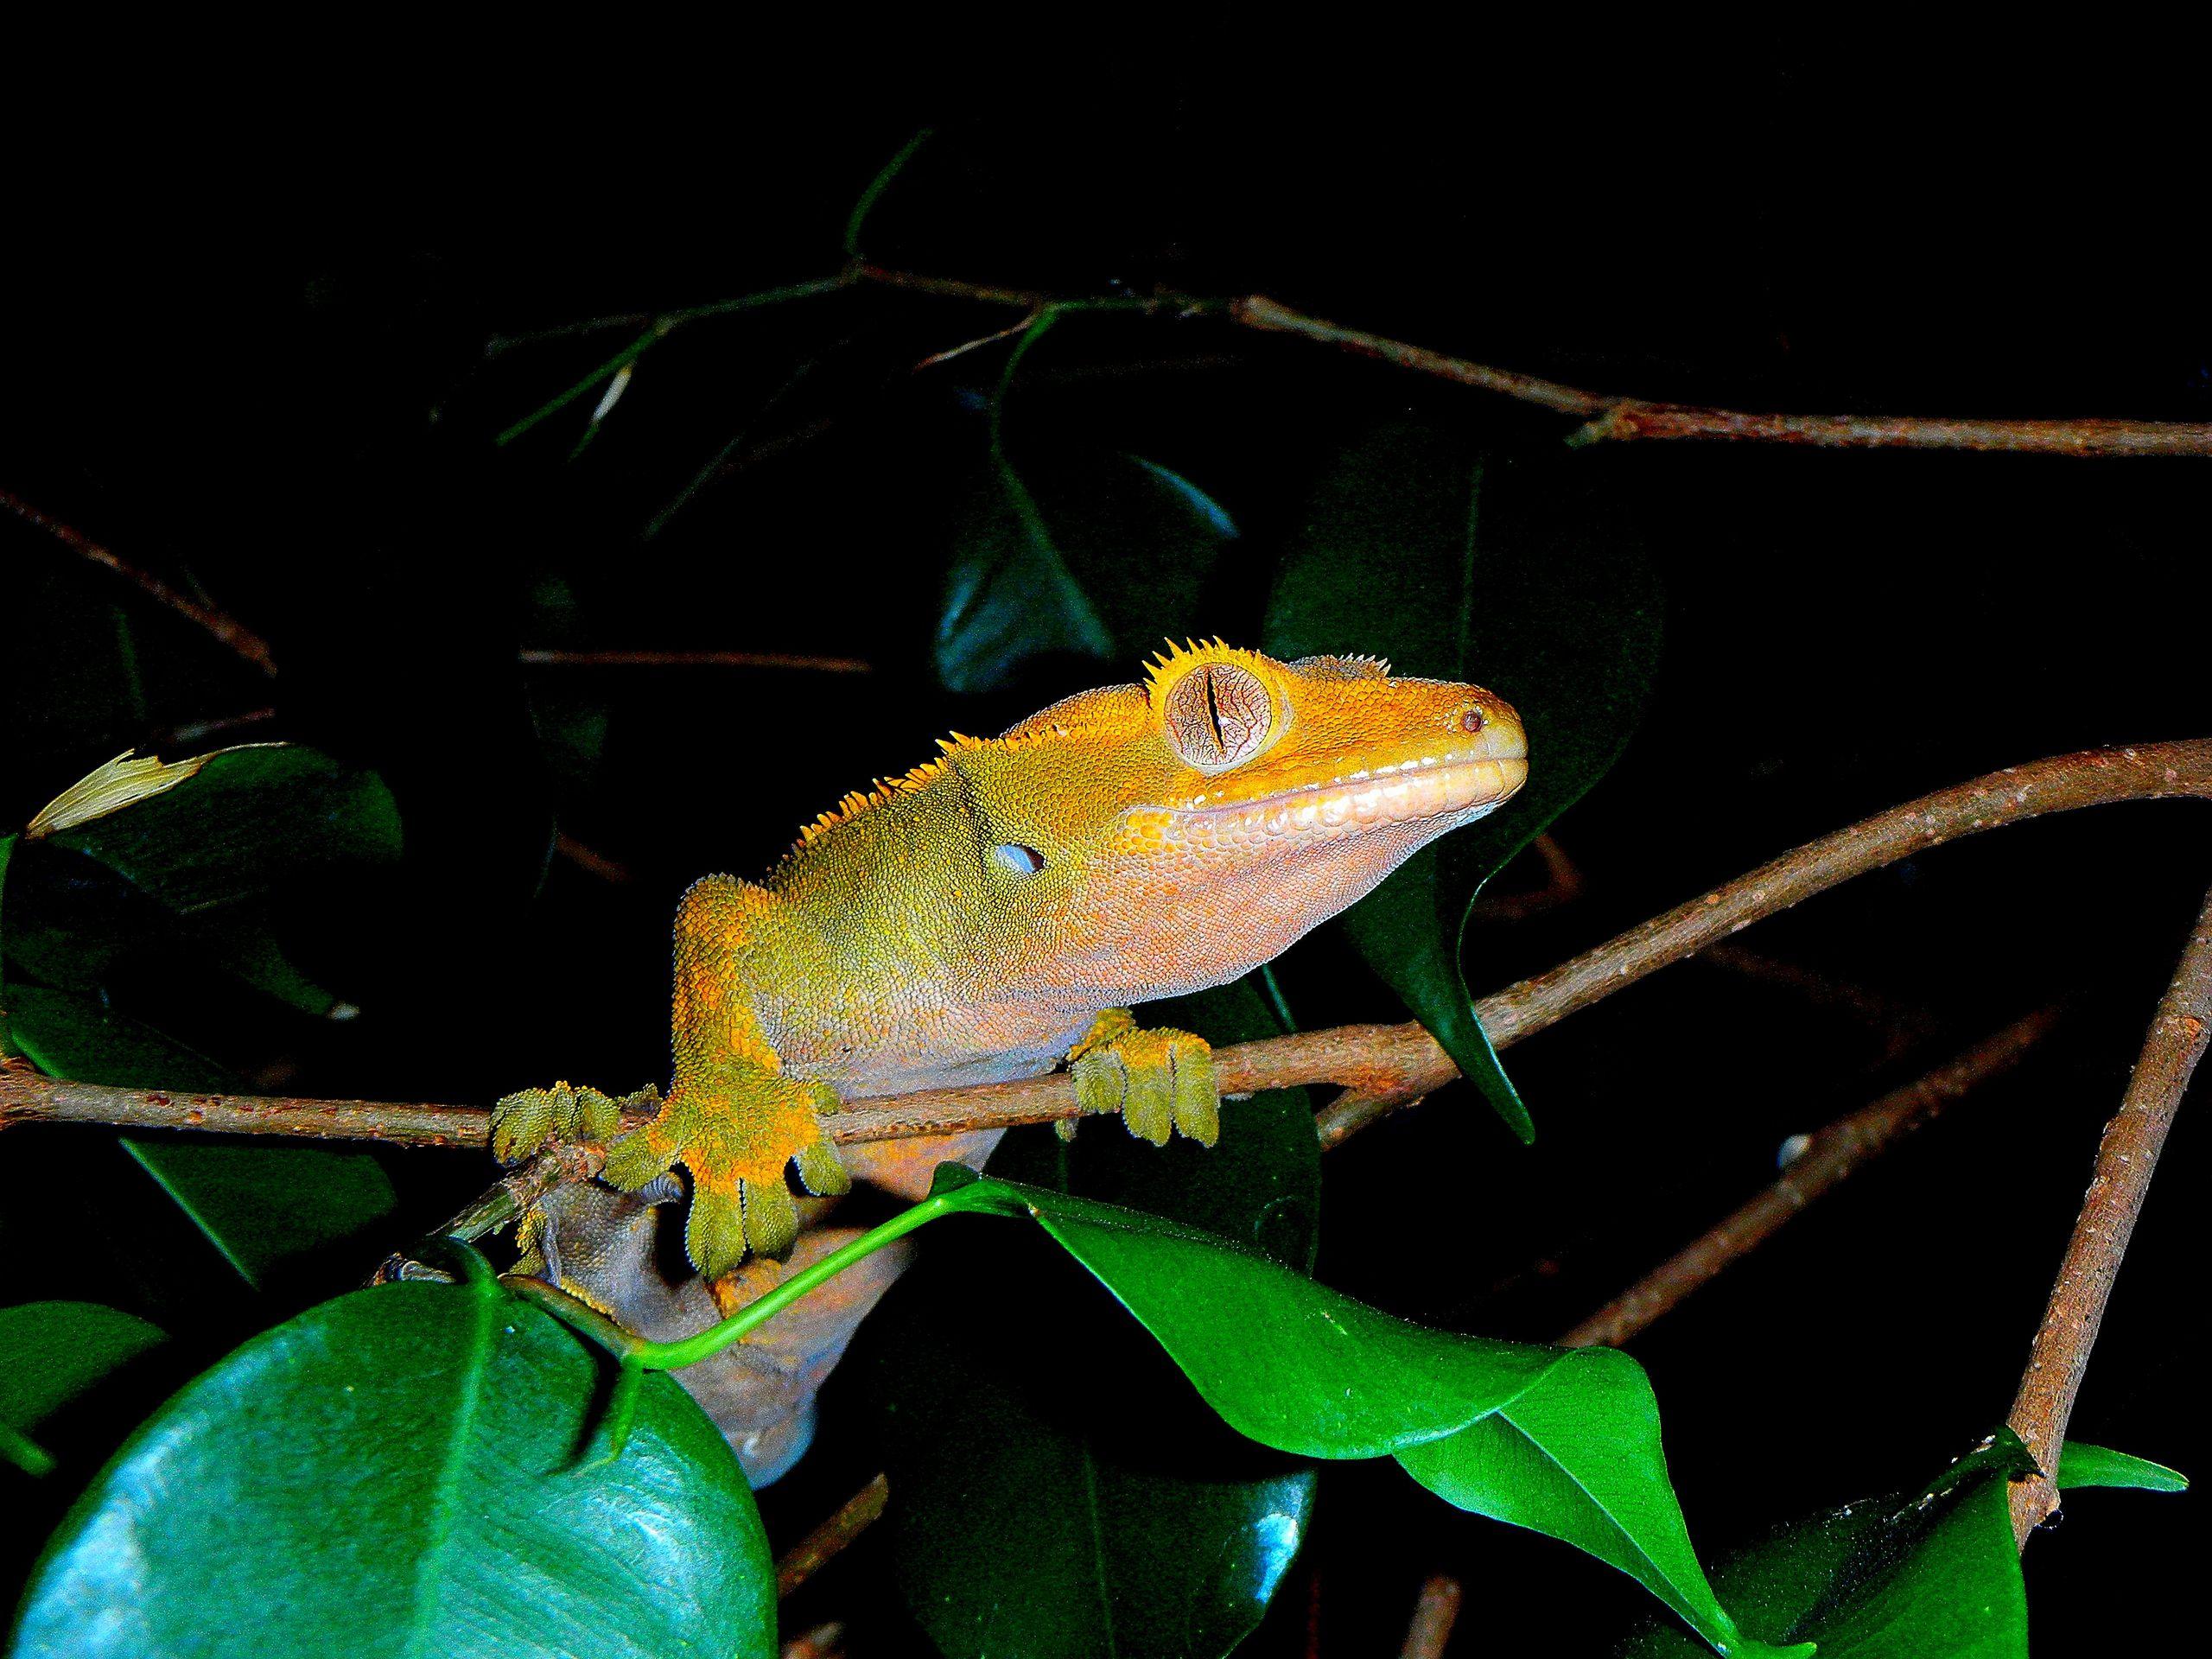 Reptiles image FLAME ORANGE FEMALE CRESTED GECKO CLOSE UP EYES HD